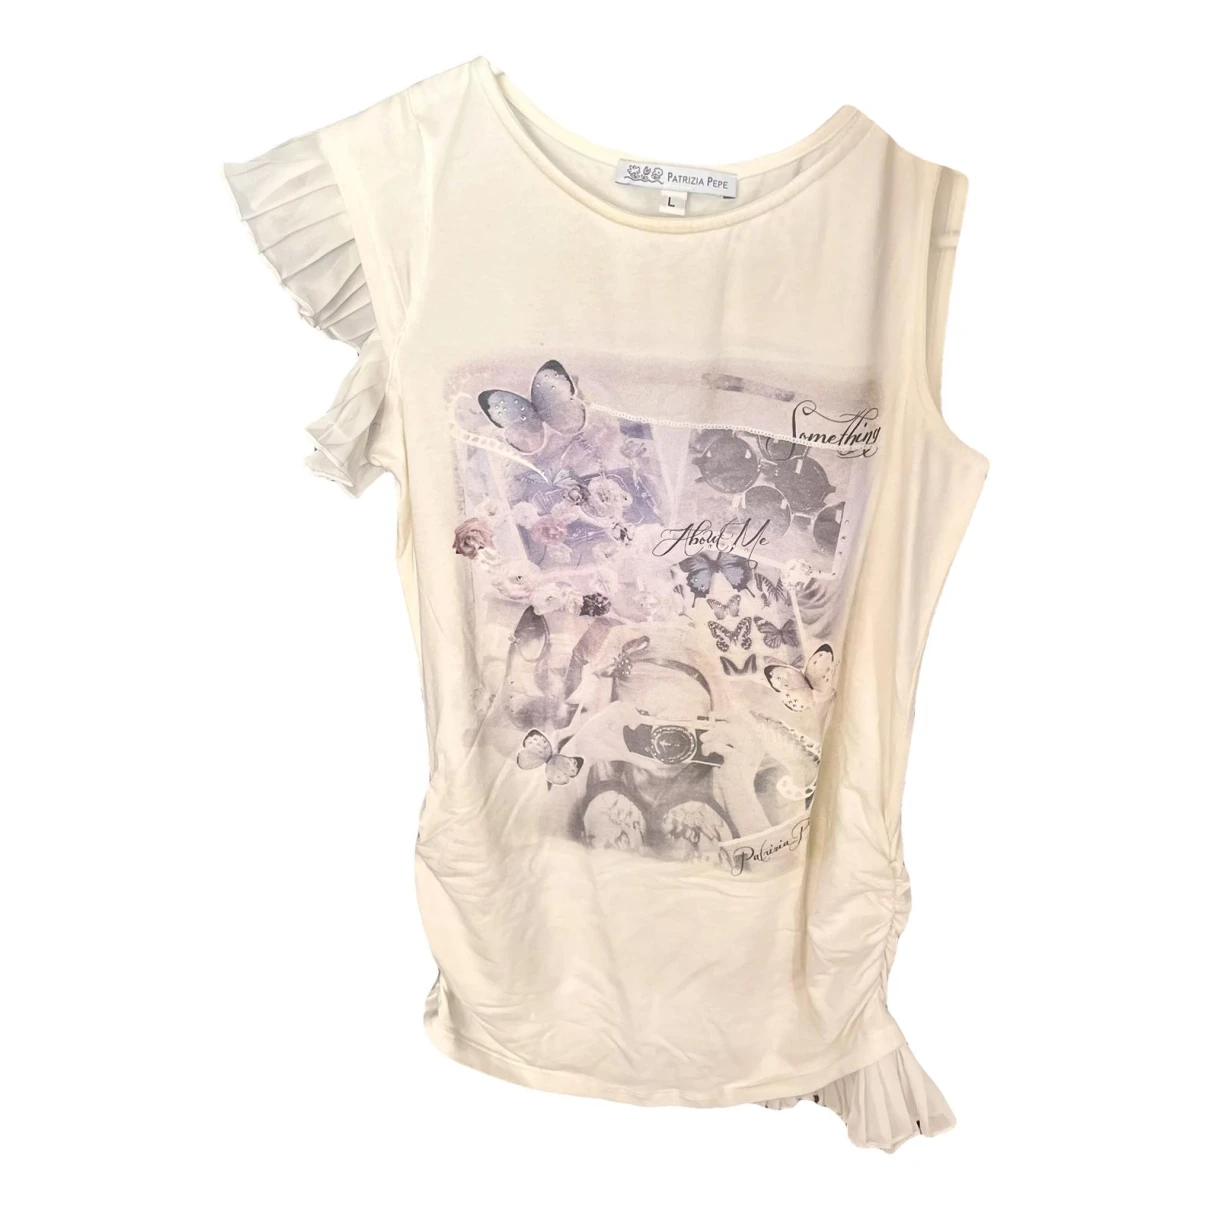 Pre-owned Patrizia Pepe T-shirt In White